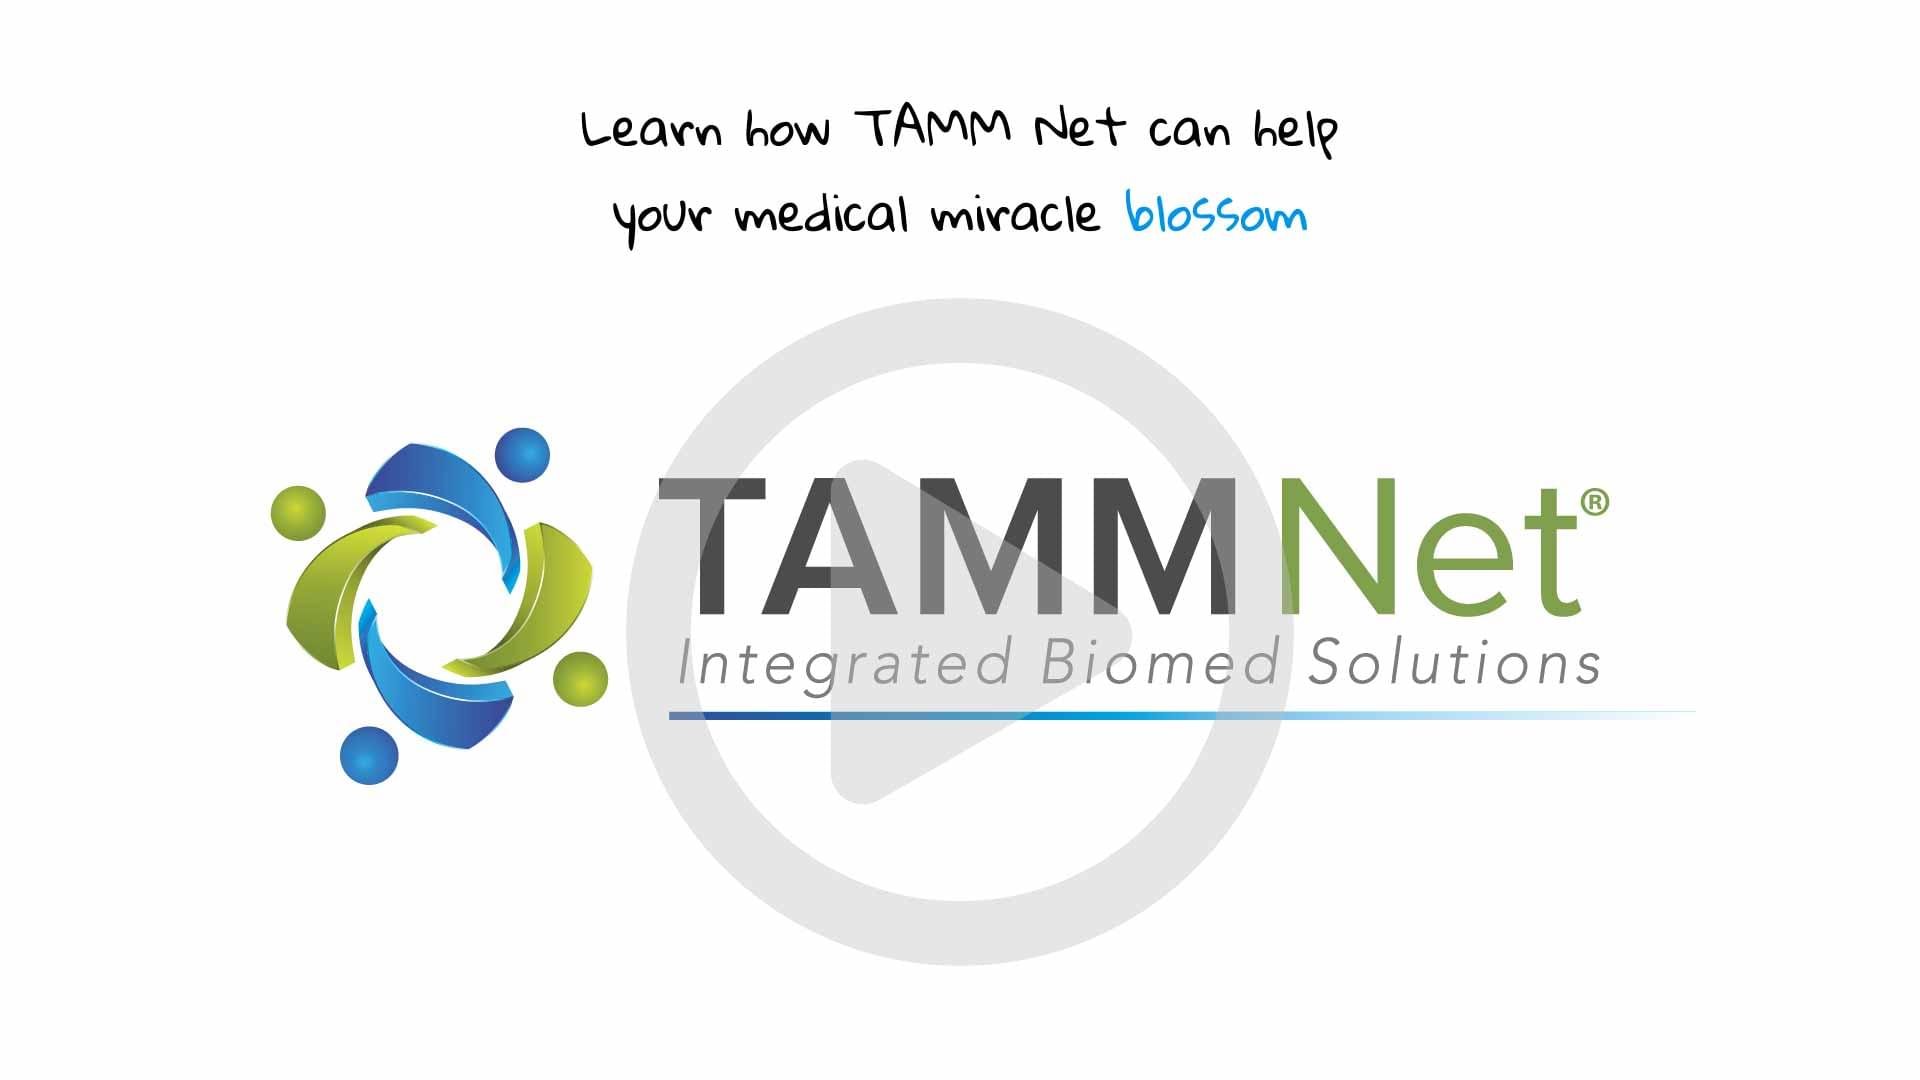 Learn how TAMM Net can help your medical miracle blossom